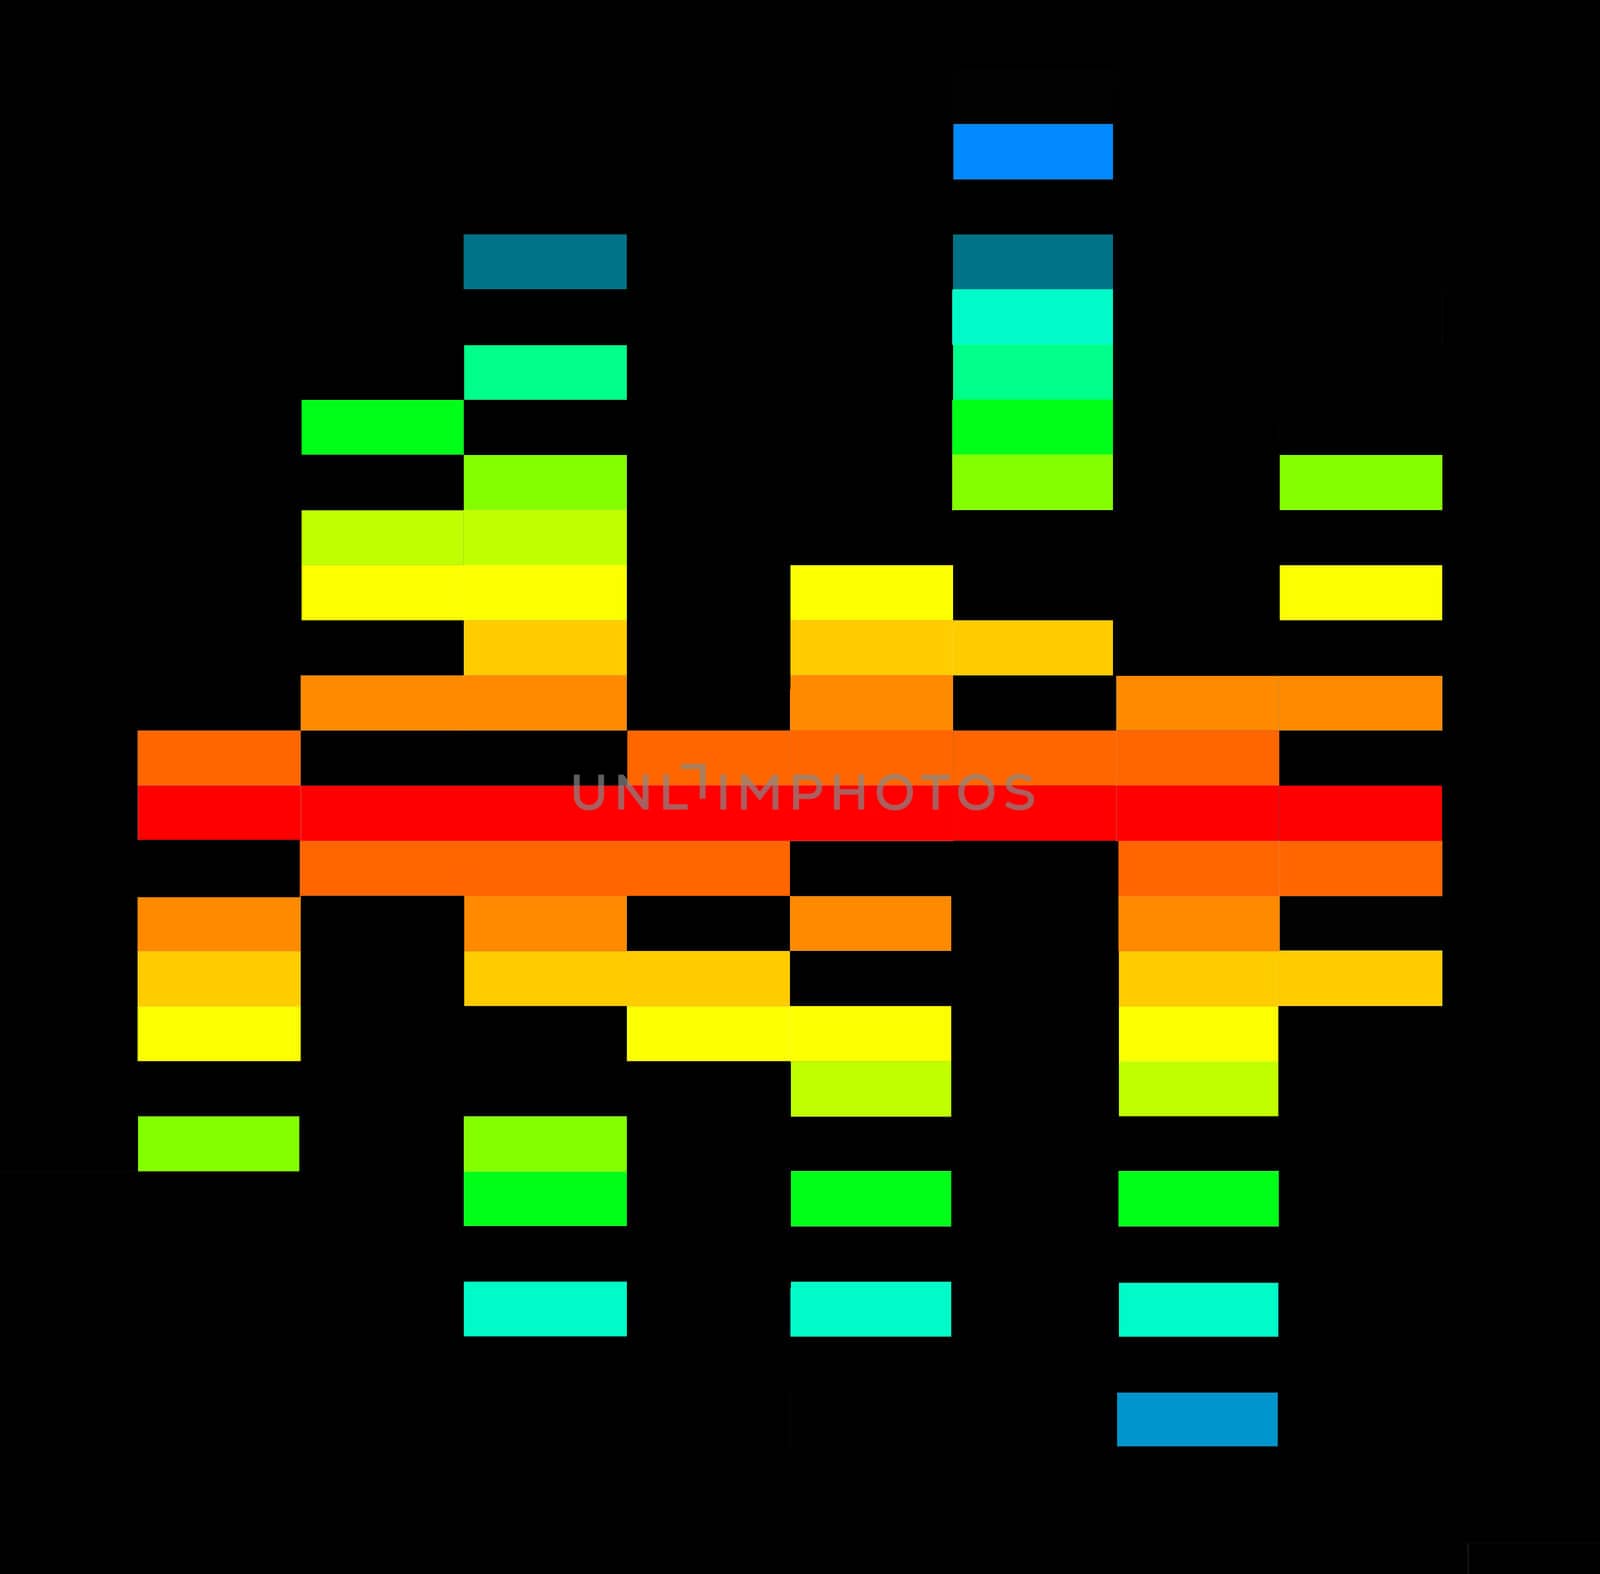 A graphic equalizer in a rainbow color.